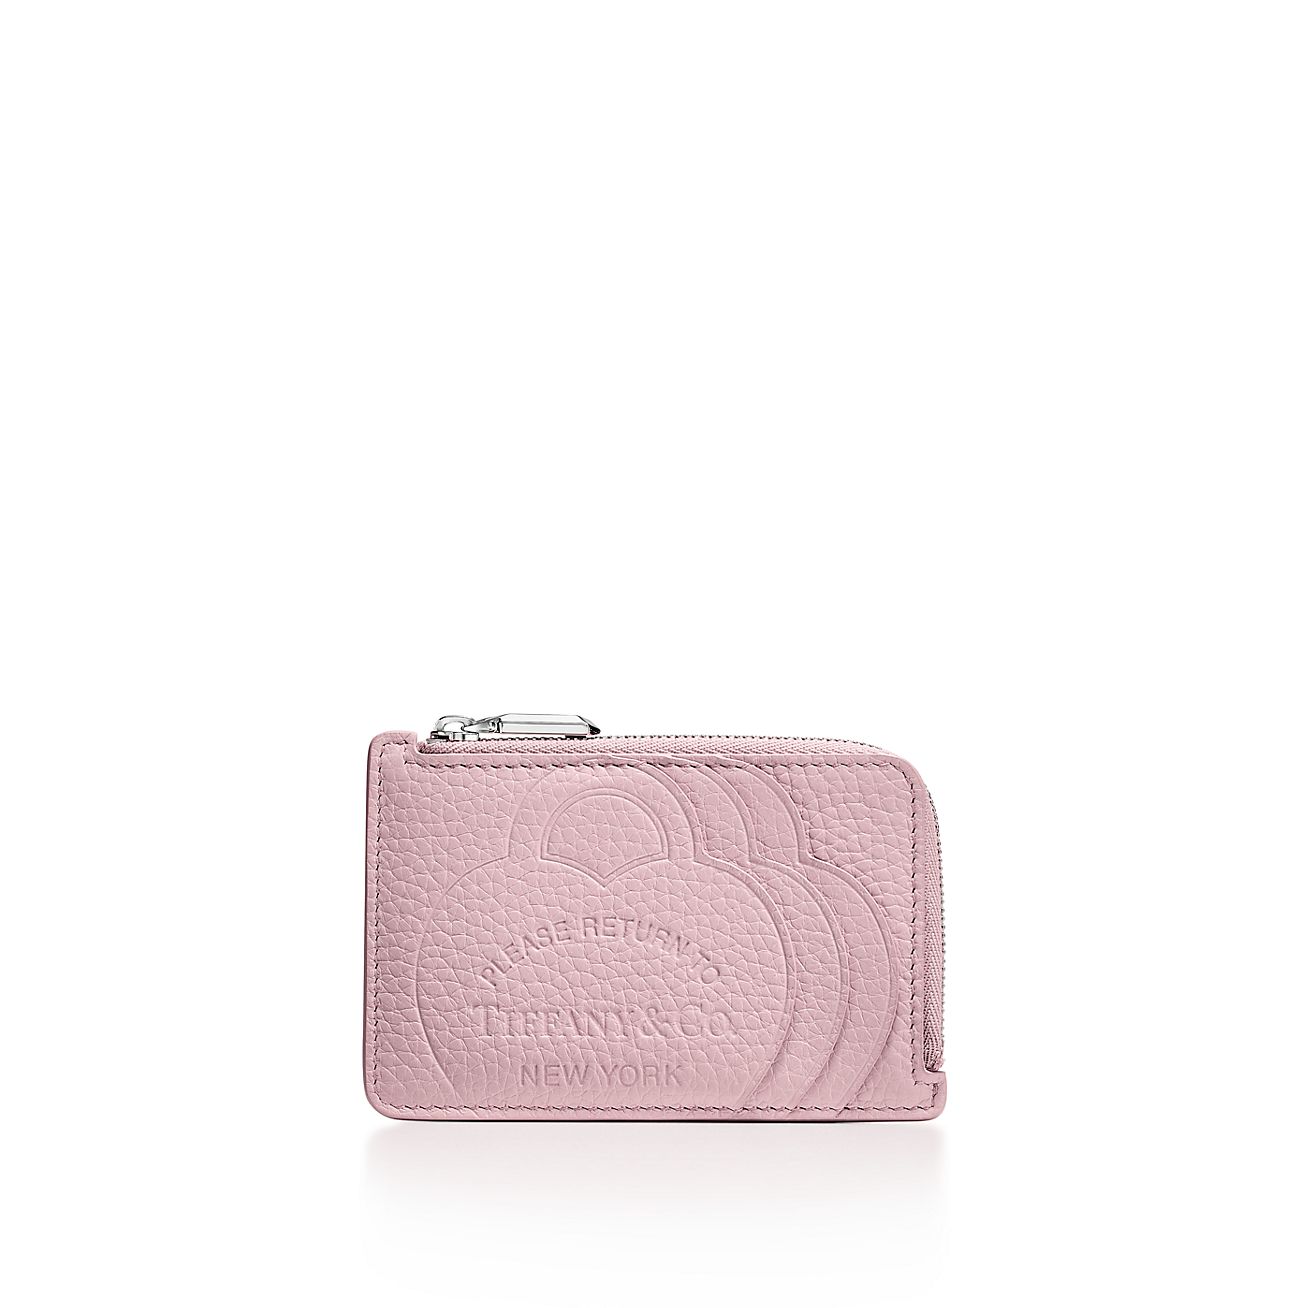 Return to Tiffany® Zip Card Case in Crystal Pink Leather | Tiffany & Co.